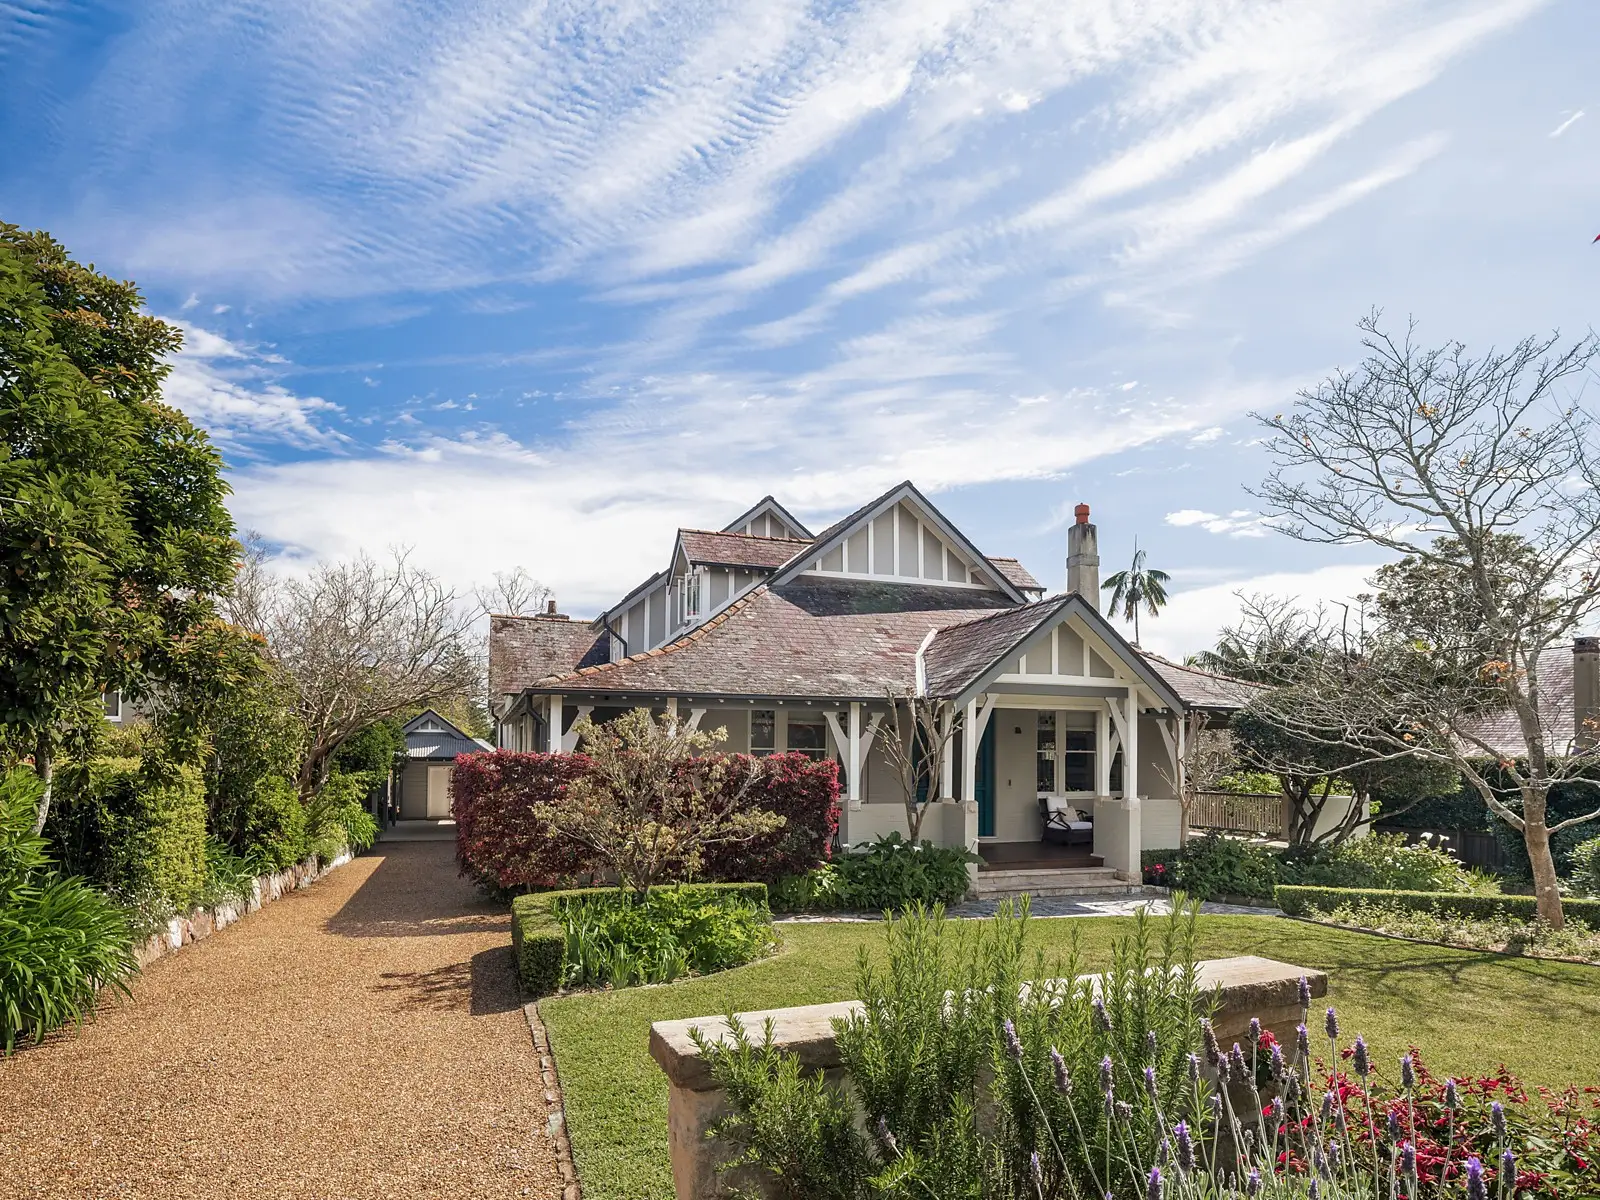 Photo #1: 54 Treatts Road, Lindfield - Sold by Sydney Sotheby's International Realty